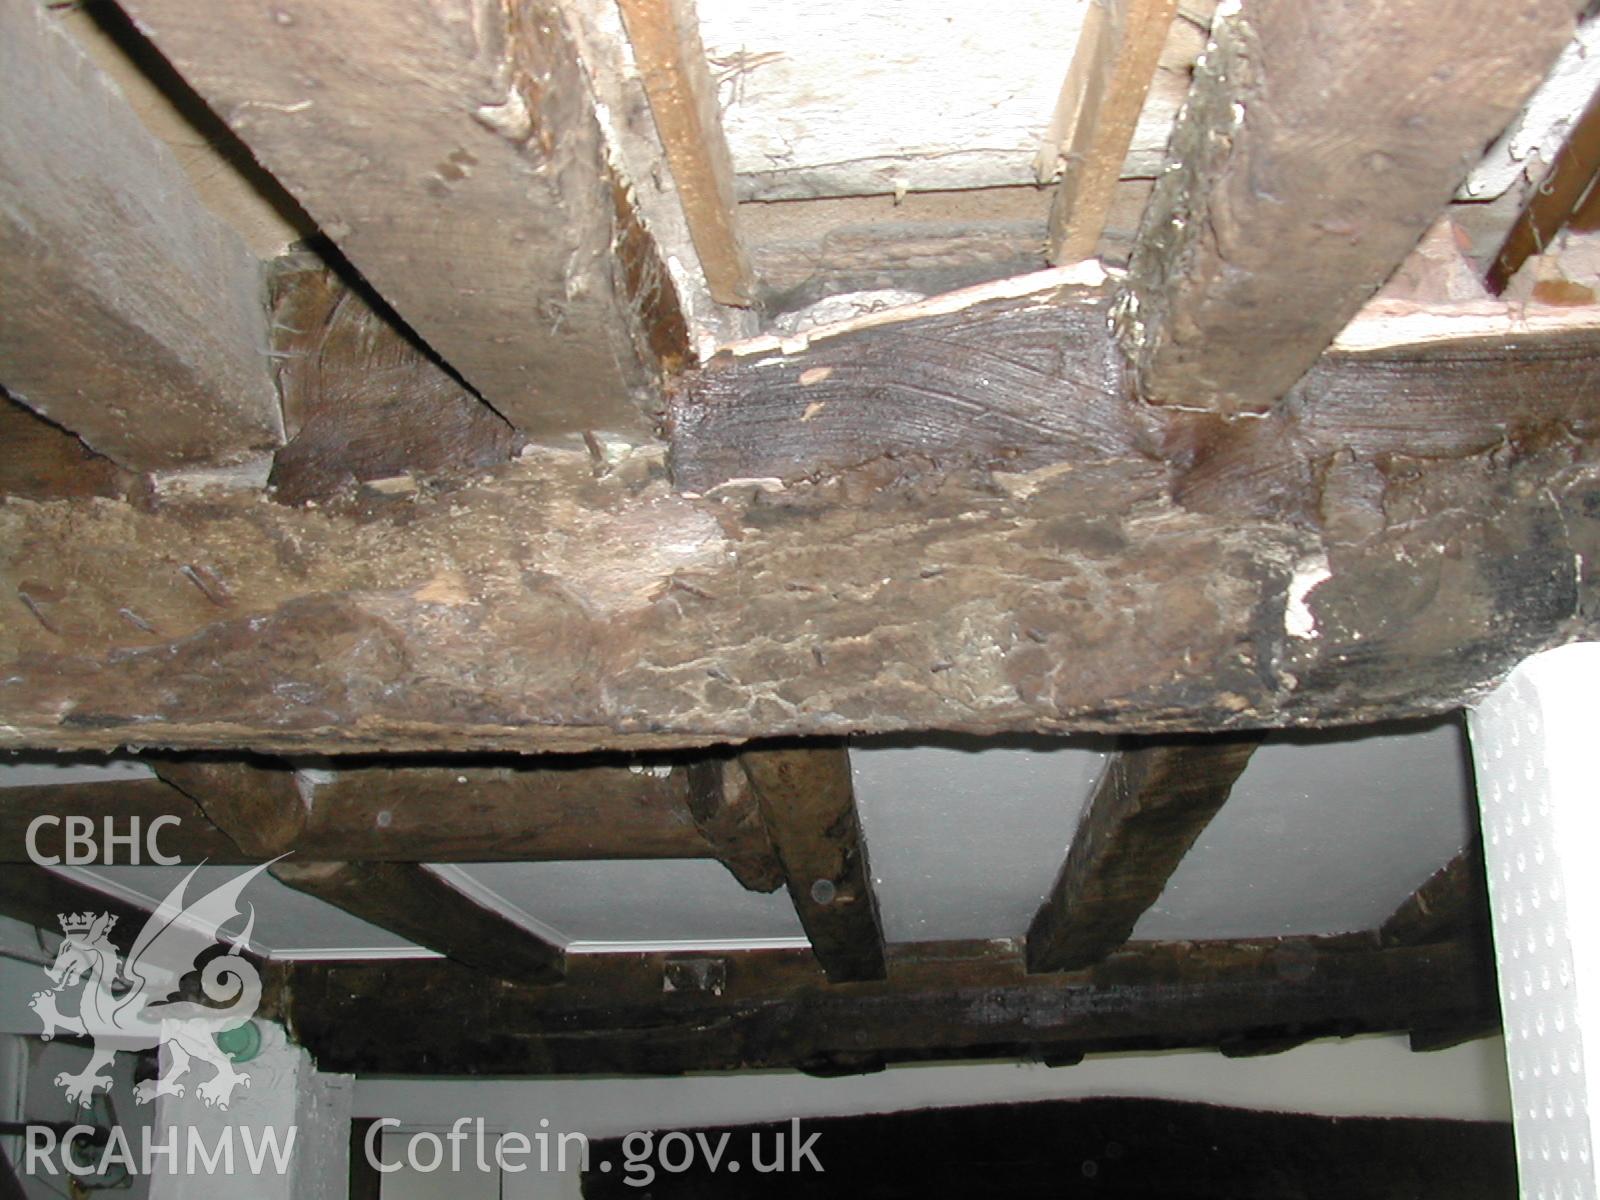 Colour photograph showing detailed interior view of timber ceiling beams at Rosacre, Gronant, Prestatyn. Unknown date. Donated by the Conservation Department of Flintshire County Council, in advance of relocation to new offices.